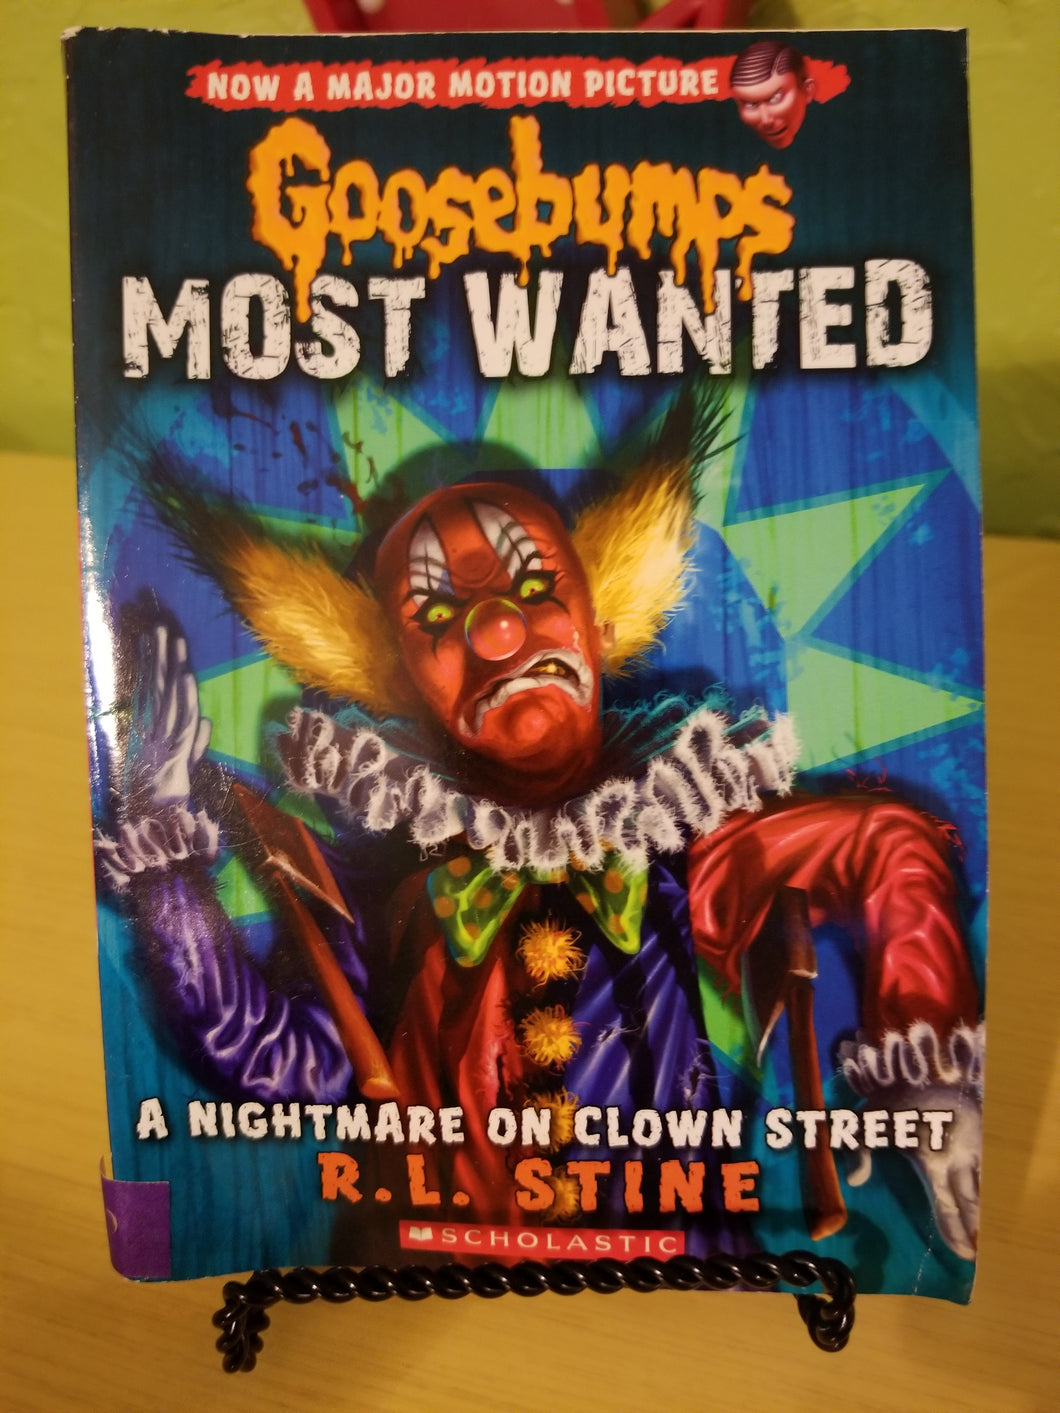 Goosebumps: Most Wanted #7 - A Nightmare on Clown St